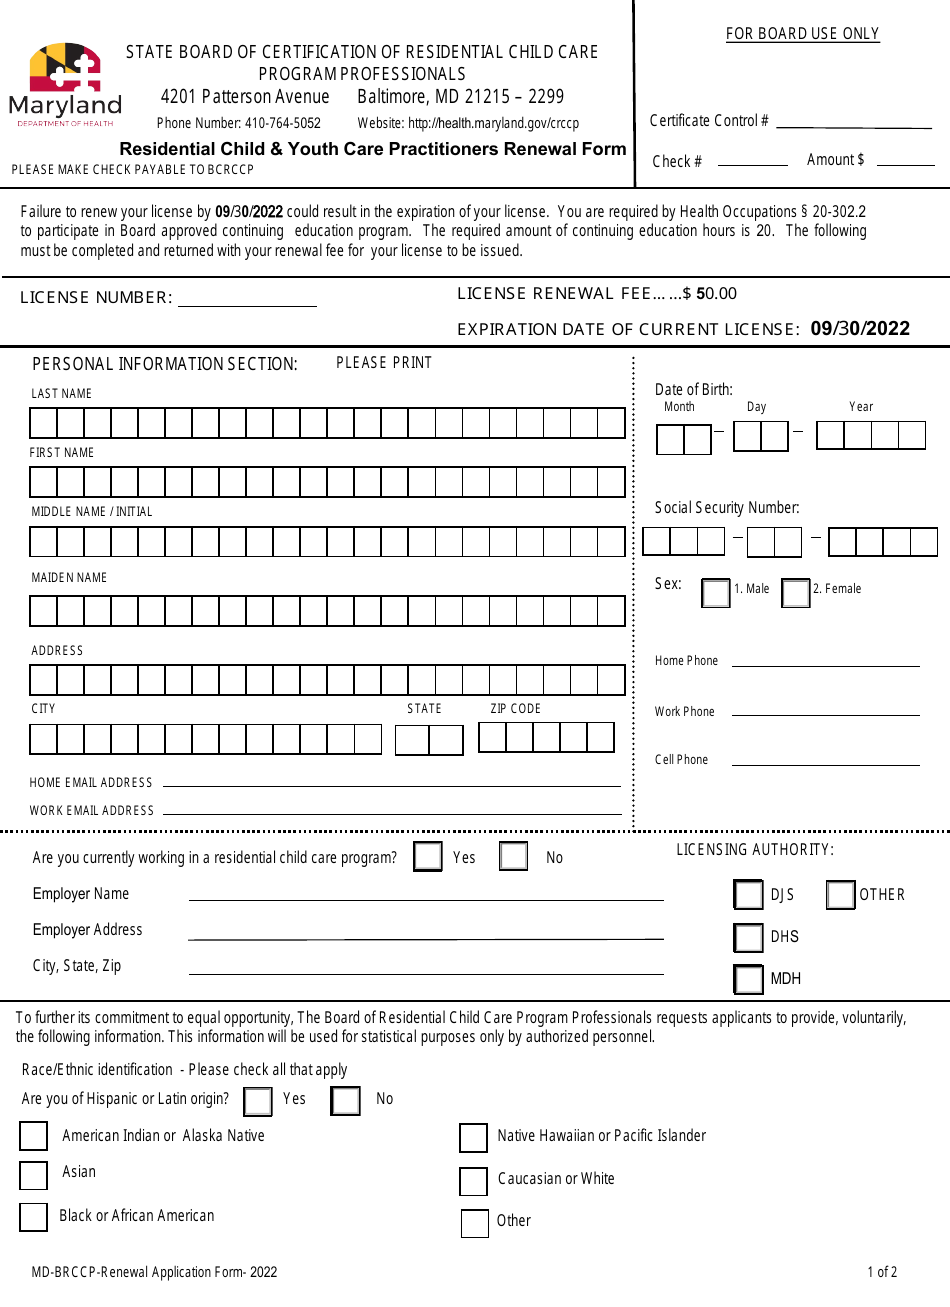 Form MD-BRCCP Residential Child  Youth Care Practitioners Renewal Form - Maryland, Page 1